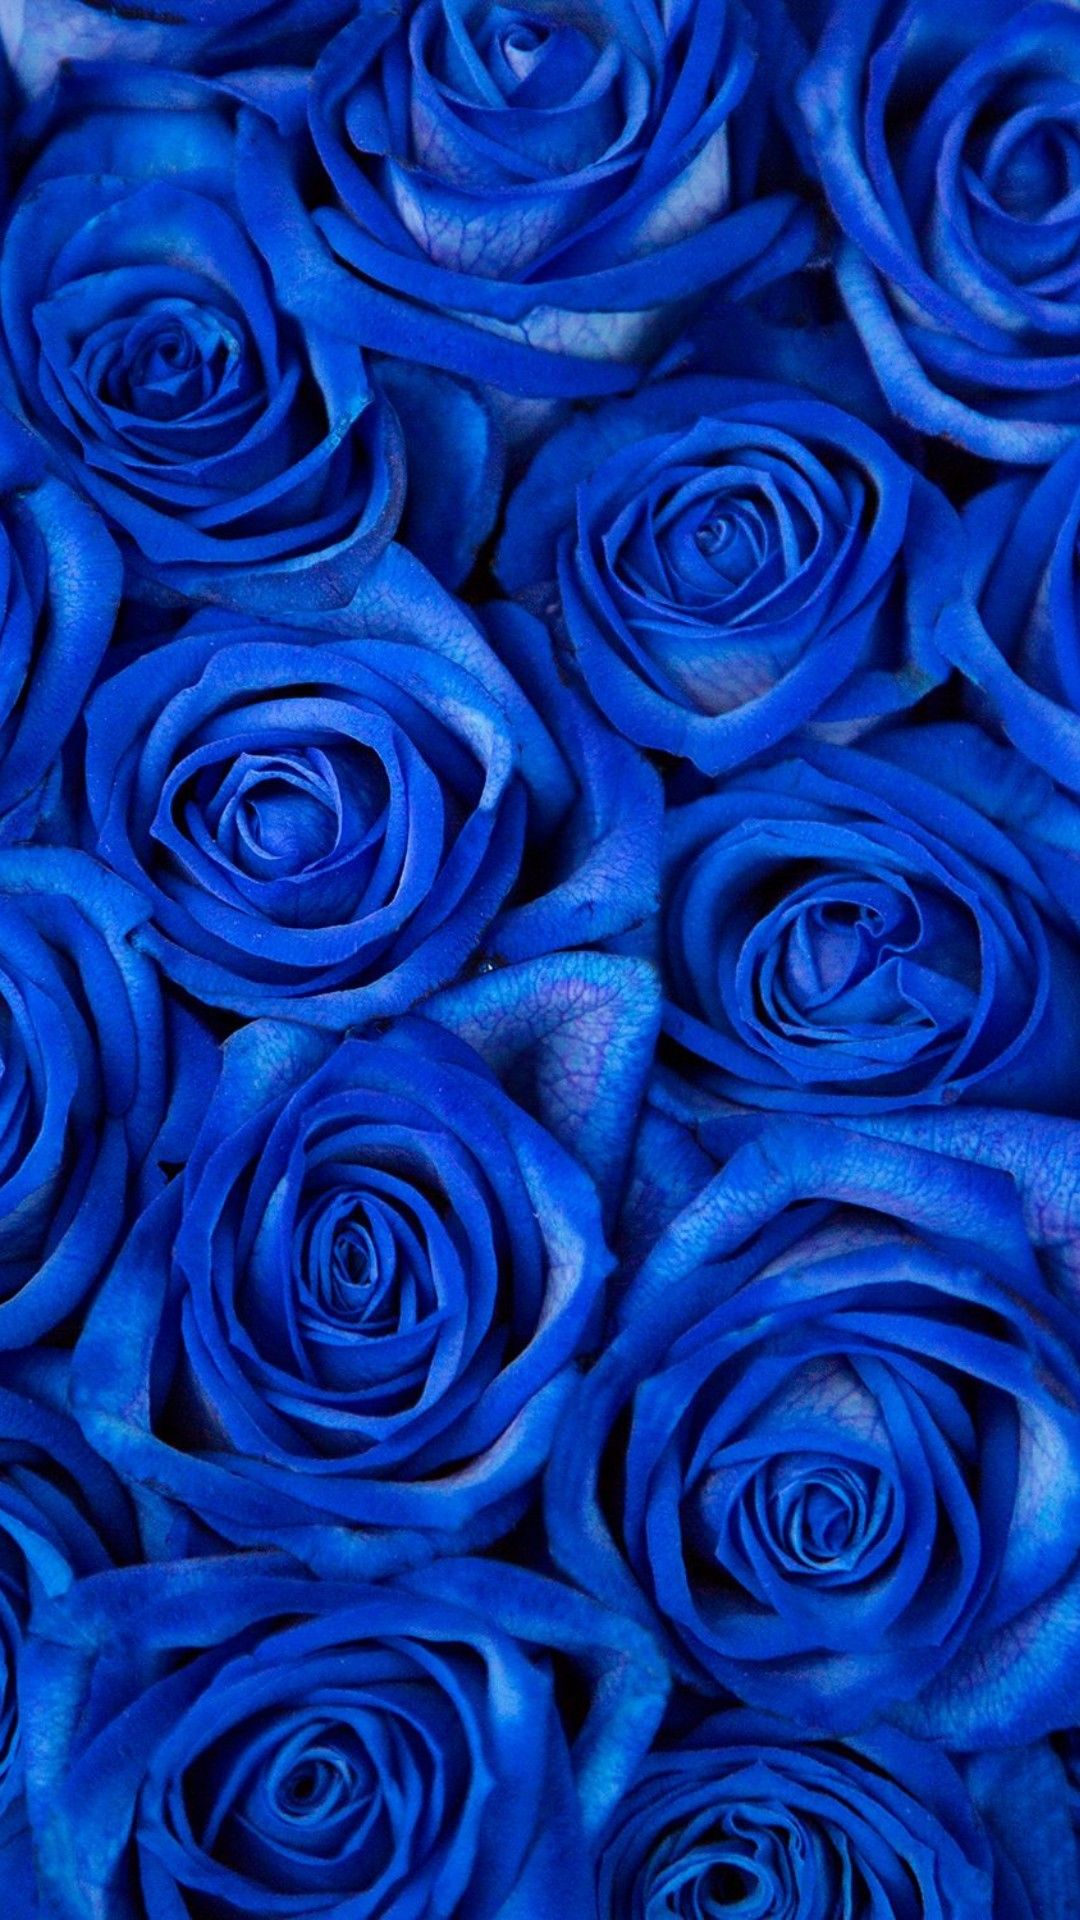 A close up of blue roses in the background - Garden